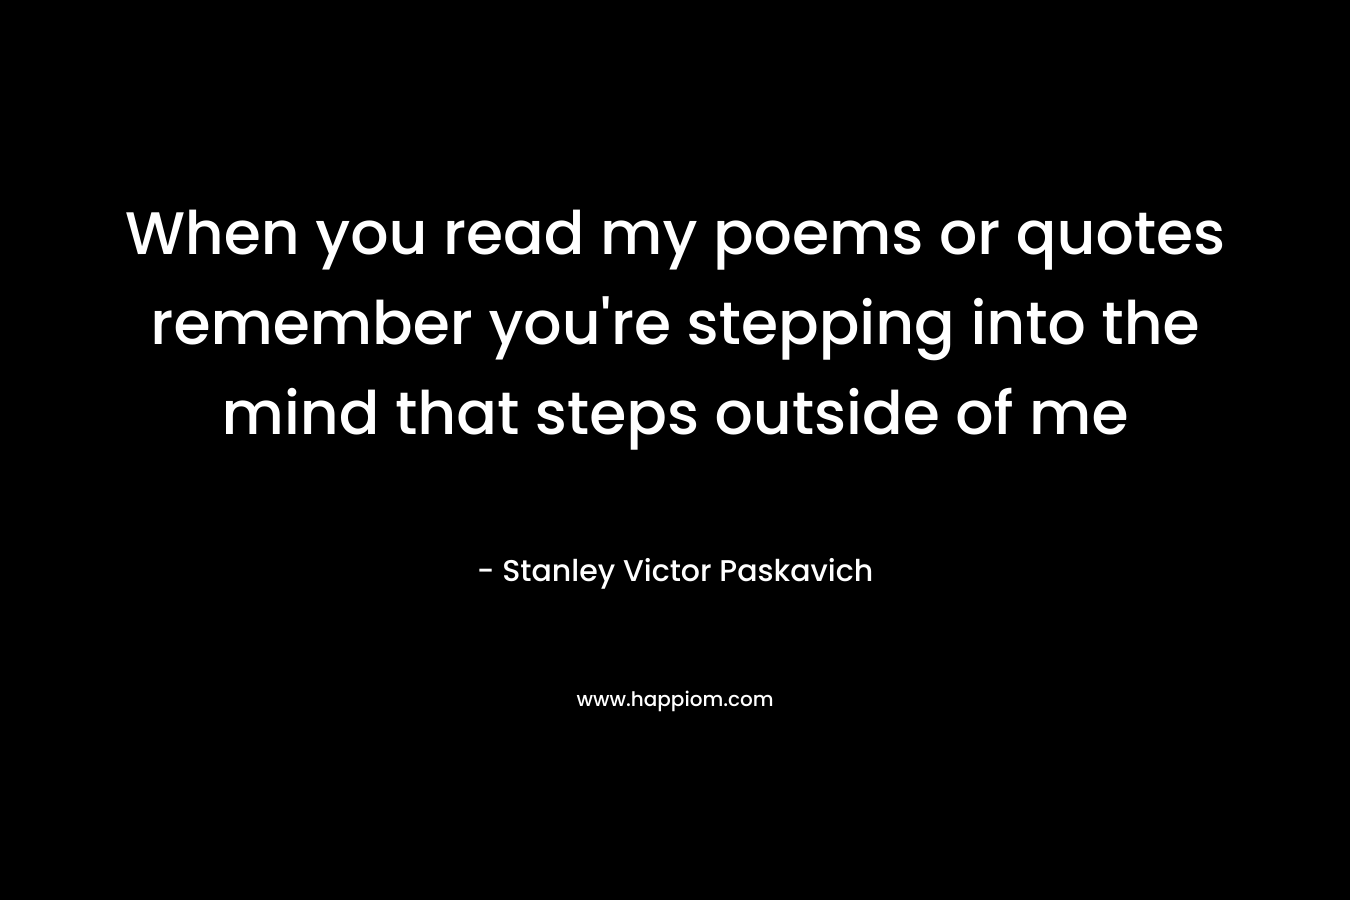 When you read my poems or quotes remember you’re stepping into the mind that steps outside of me – Stanley Victor Paskavich